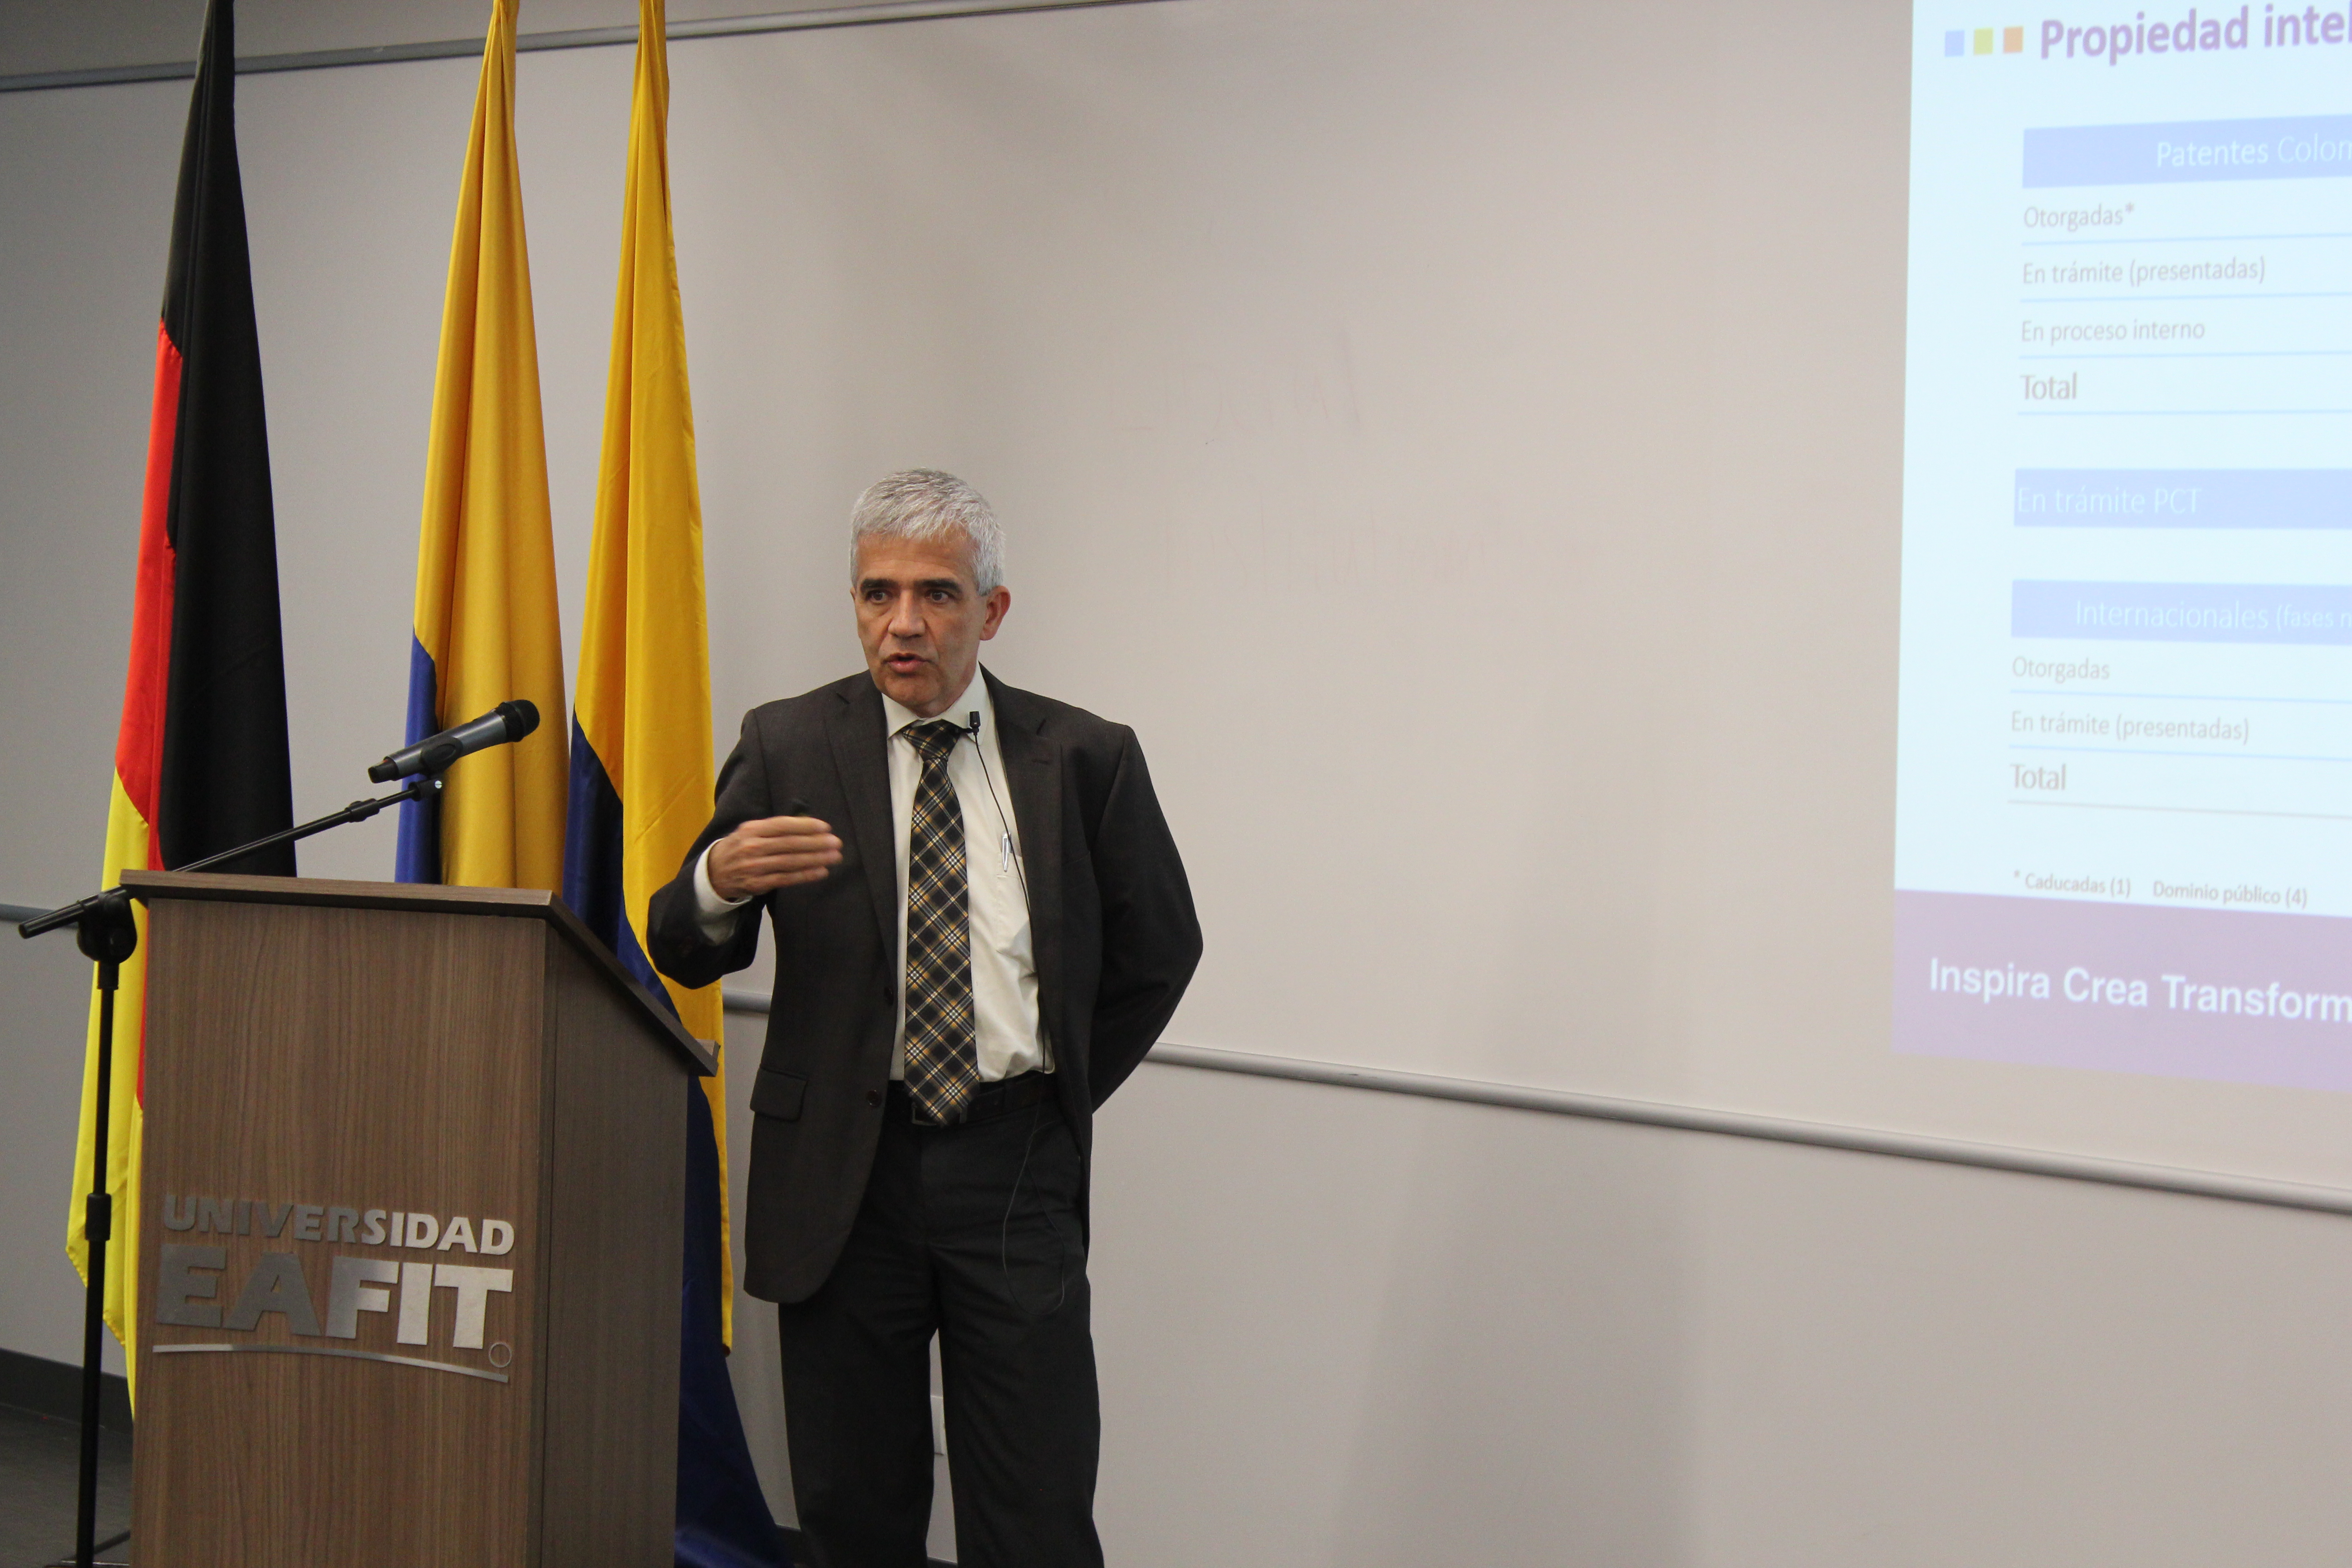 Dr. Juan Felipe Mejía from the School of Economics and Finance at EAFIT presented current German-Colombian initiatives